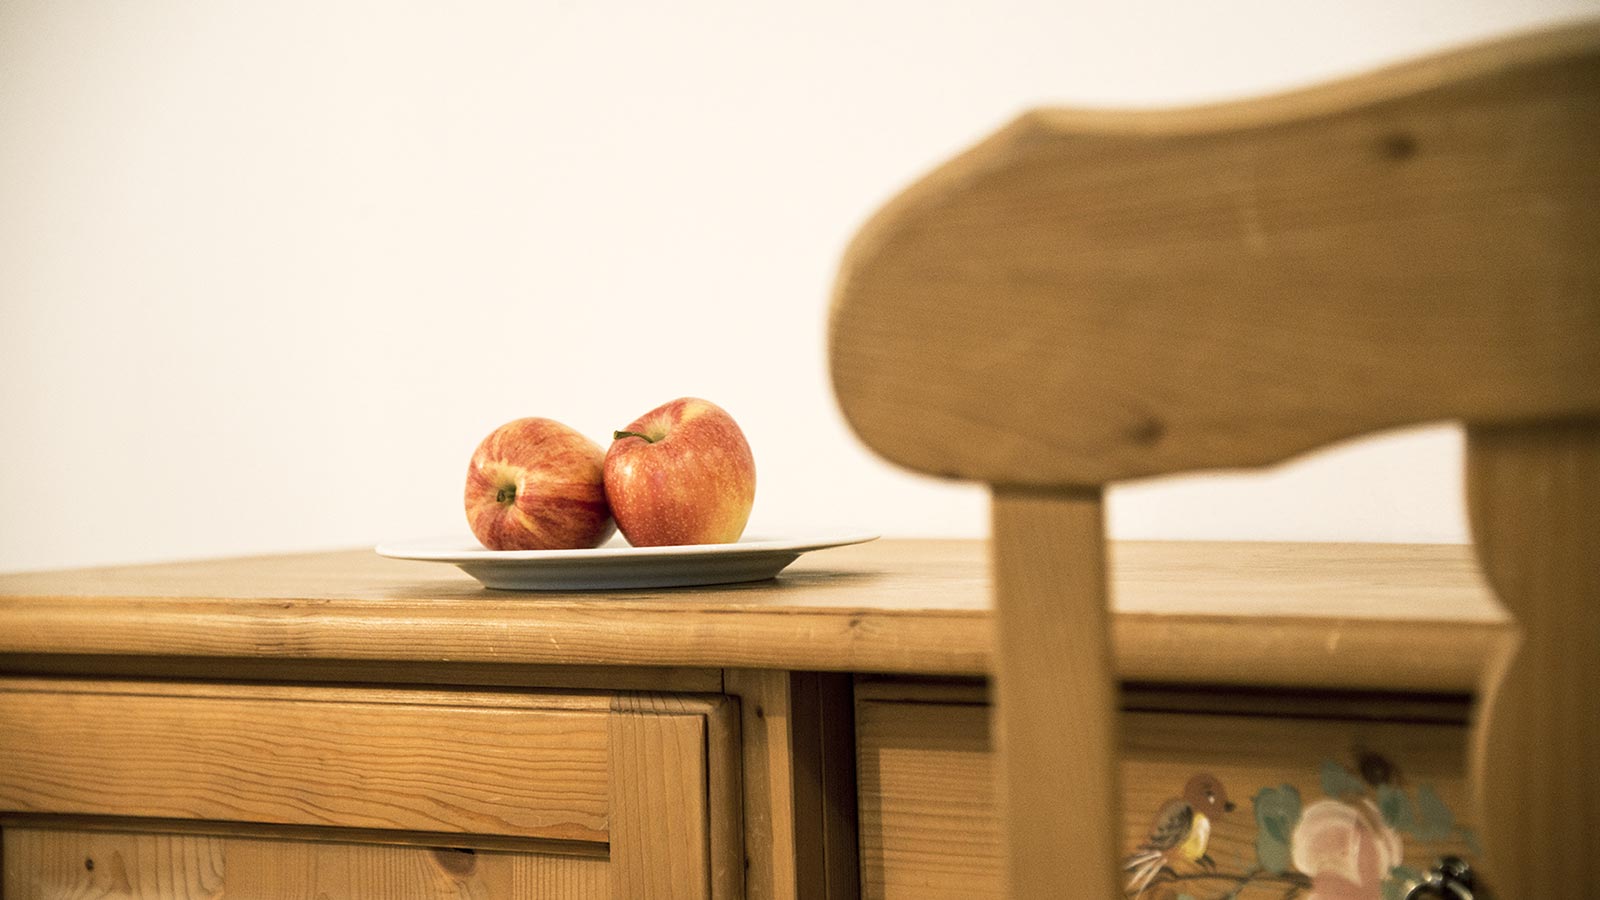 Wooden case bench, on which is placed a plate with two red apples, and blurred backrest of a wooden chair